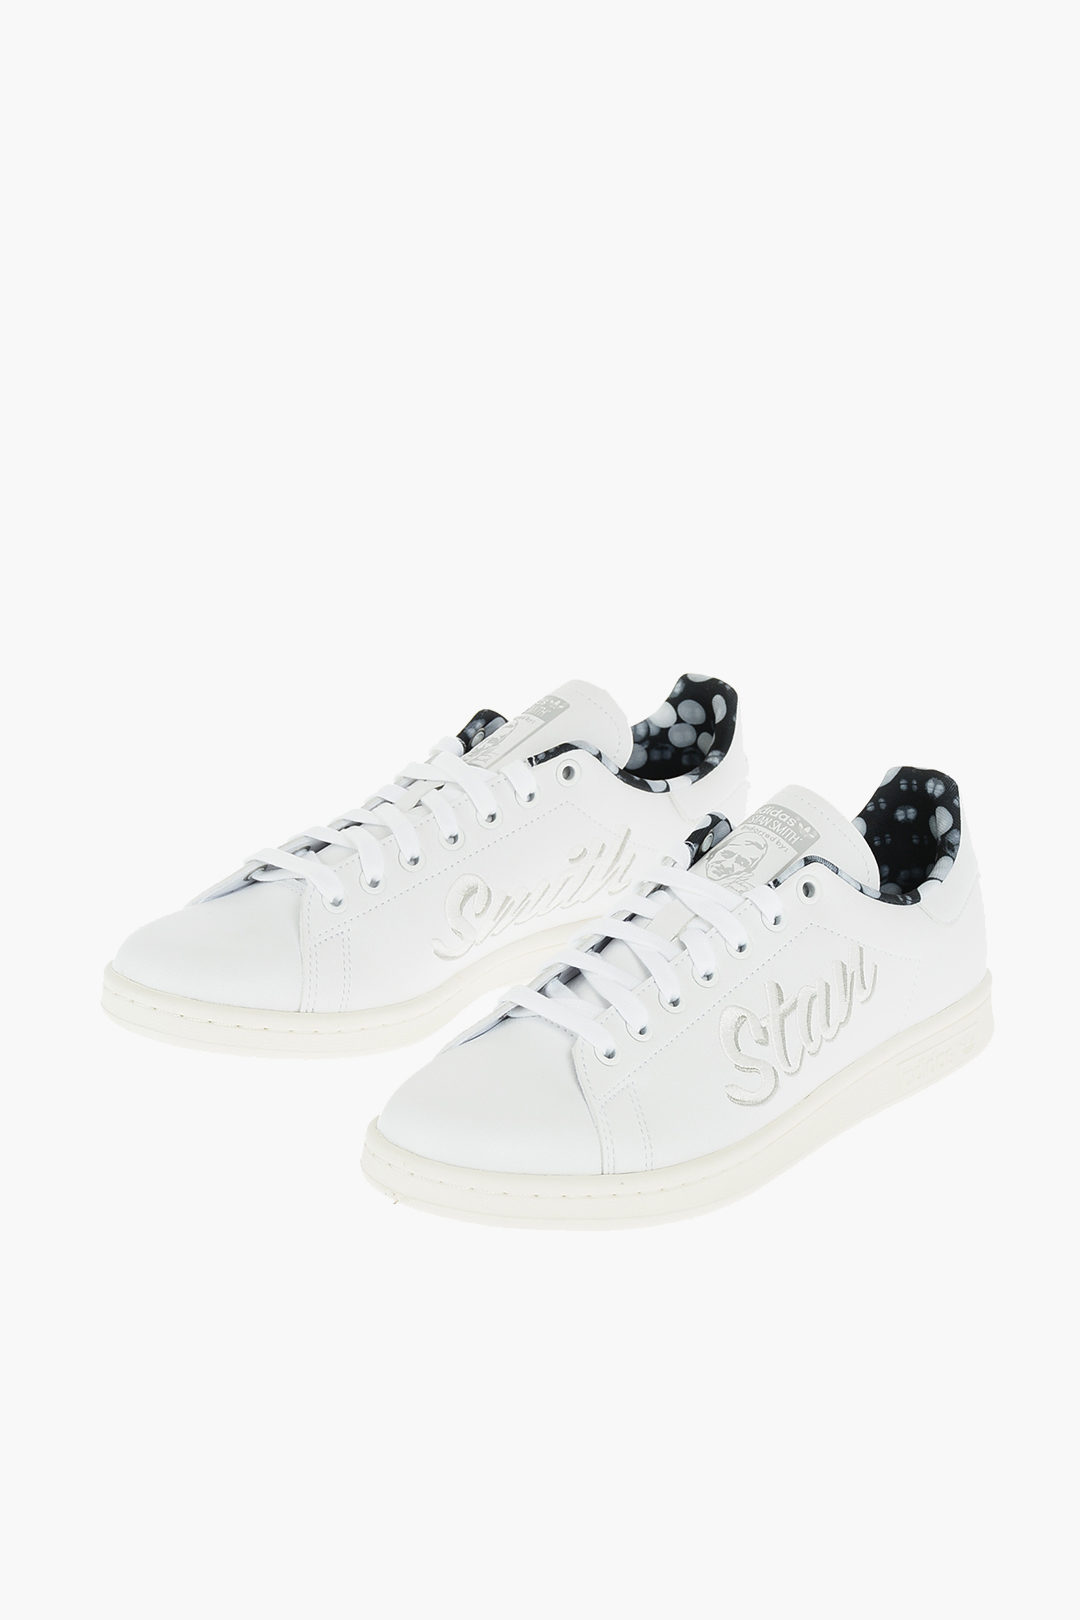 Adidas faux leather STAN SMITH sneakers men - Glamood Outlet